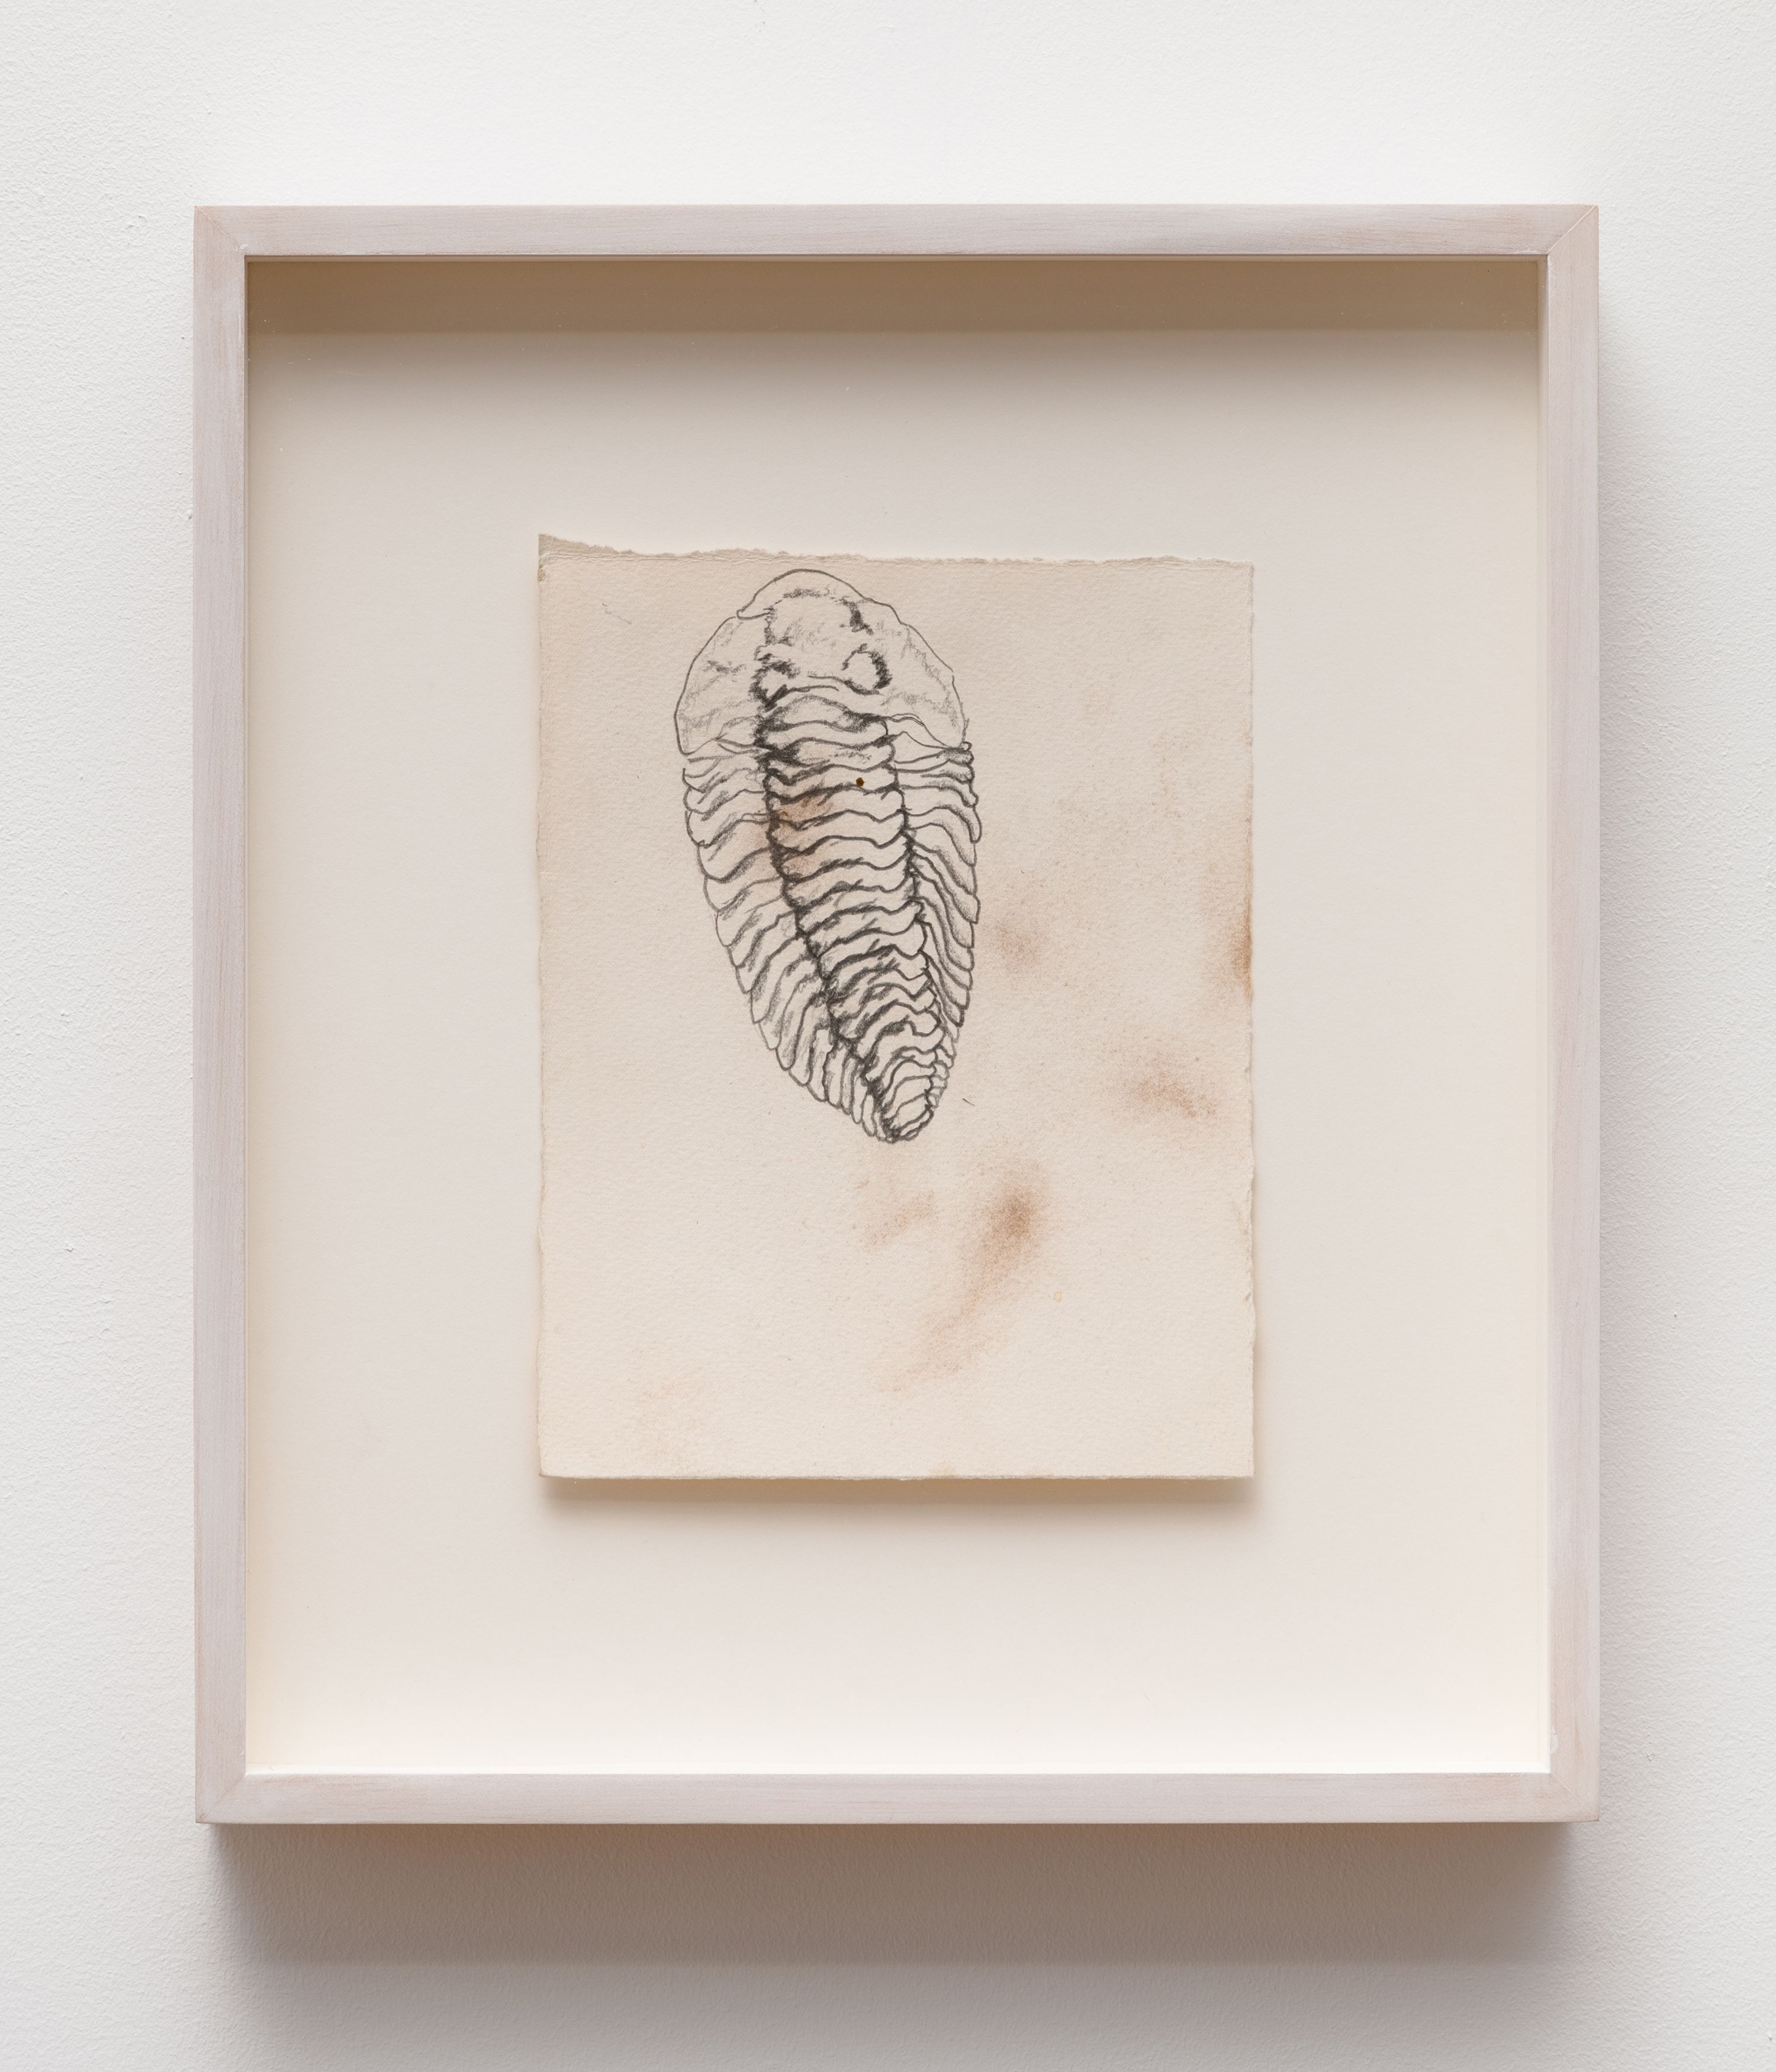 Bogosi Sekhukhuni, Trilobyte 1, 2018, pencil and earth on paper, 8 5/8 x 6 3/4 in. (22 x 17.1 cm) (paper size)